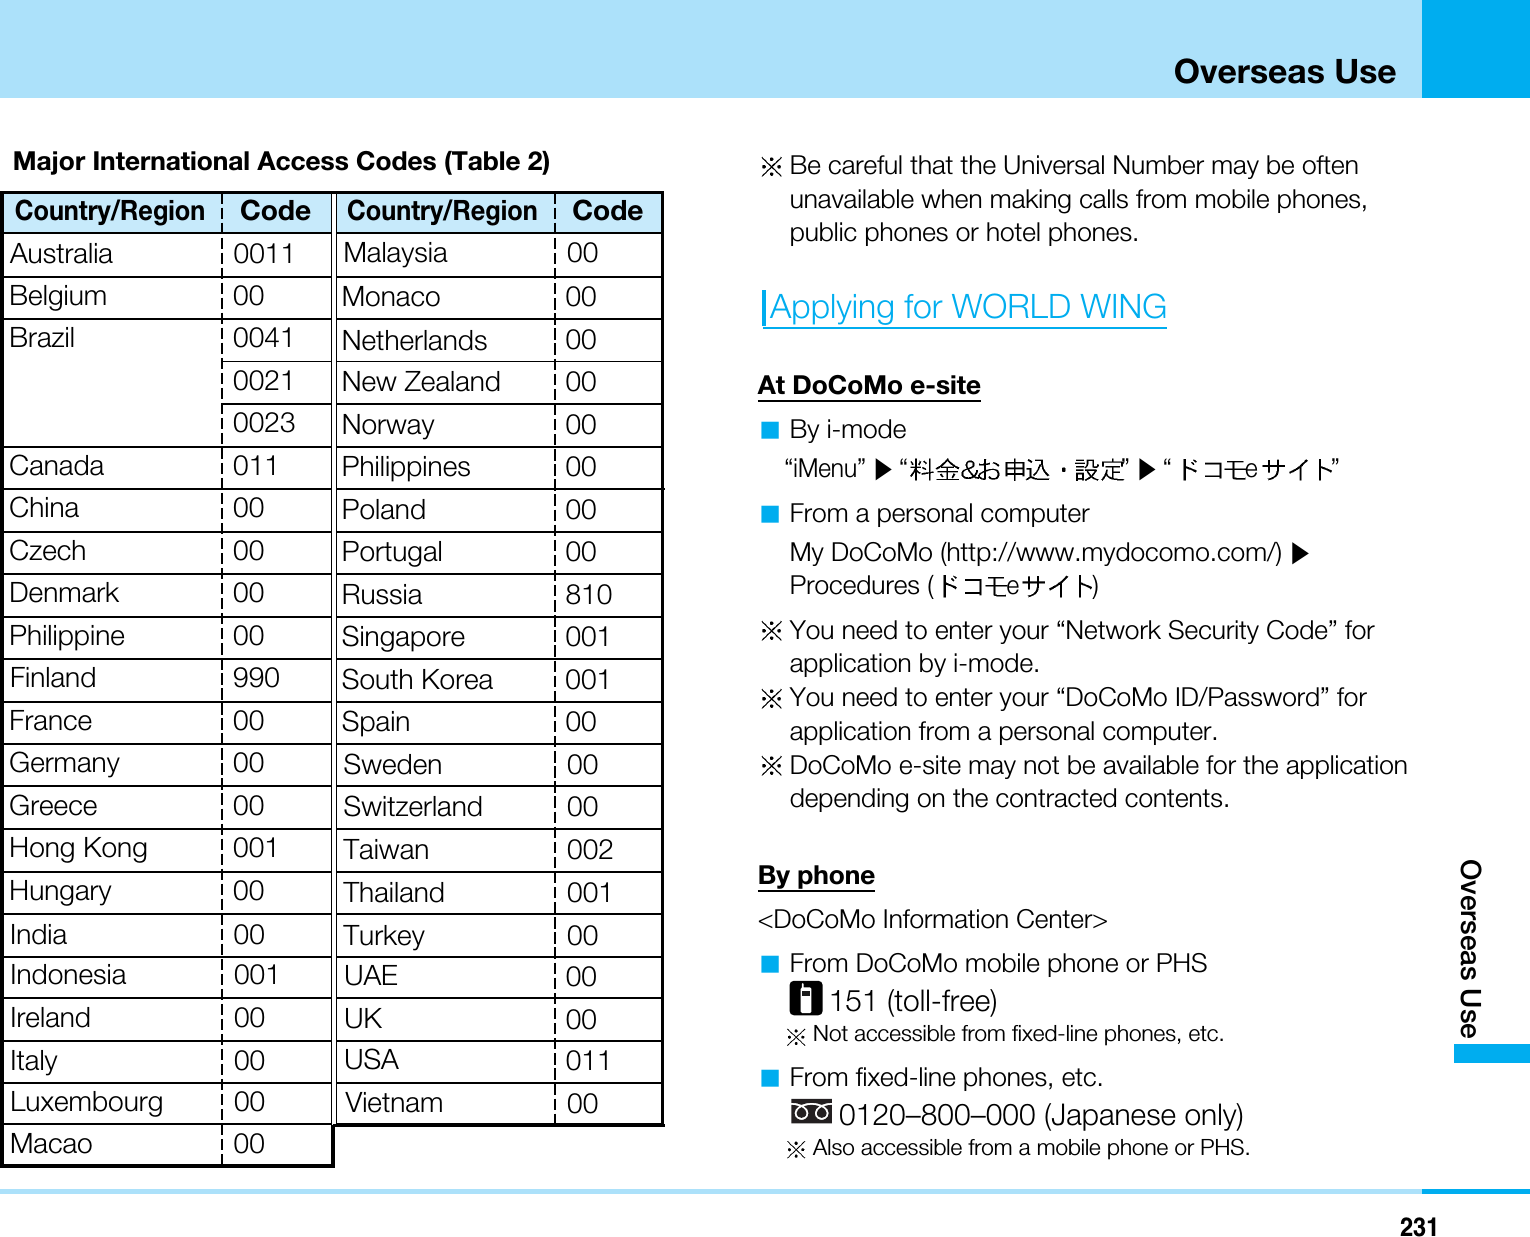 231Overseas UseOverseas UseMajor International Access Codes (Table 2) Be careful that the Universal Number may be oftenunavailable when making calls from mobile phones,public phones or hotel phones.Applying for WORLD WINGAt DoCoMo e-siteaBy i-mode“iMenu” ]“ ” ]“ e ”aFrom a personal computerMy DoCoMo (http://www.mydocomo.com/)]Procedures (e)You need to enter your “Network Security Code” forapplication by i-mode.You need to enter your “DoCoMo ID/Password” forapplication from a personal computer.DoCoMo e-site may not be available for the applicationdepending on the contracted contents.By phone&lt;DoCoMo Information Center&gt;aFrom DoCoMo mobile phone or PHS151 (toll-free)Not accessible from fixed-line phones, etc.aFrom fixed-line phones, etc.0120–800–000 (Japanese only)Also accessible from a mobile phone or PHS.Ireland 00Australia 0011India 00Indonesia 001Italy 00Luxembourg 00UAE 00UK 00USA 011Country/RegionCodeBelgium 00Brazil 004100210023Country/RegionCodeMonaco 00Netherlands 00New Zealand 00NorwayPhilippinesPoland00Canada 011 00China 00 00Czech 00 Portugal 00Denmark 00 Russia 81000 Singapore 001990 South Korea 001France 00 Spain 00Germany 00 Sweden 00Greece 00 Switzerland 00Hong Kong 001 Taiwan 002HungaryMalaysia0000Thailand 001Turkey 00Macao 00Vietnam 00PhilippineFinland